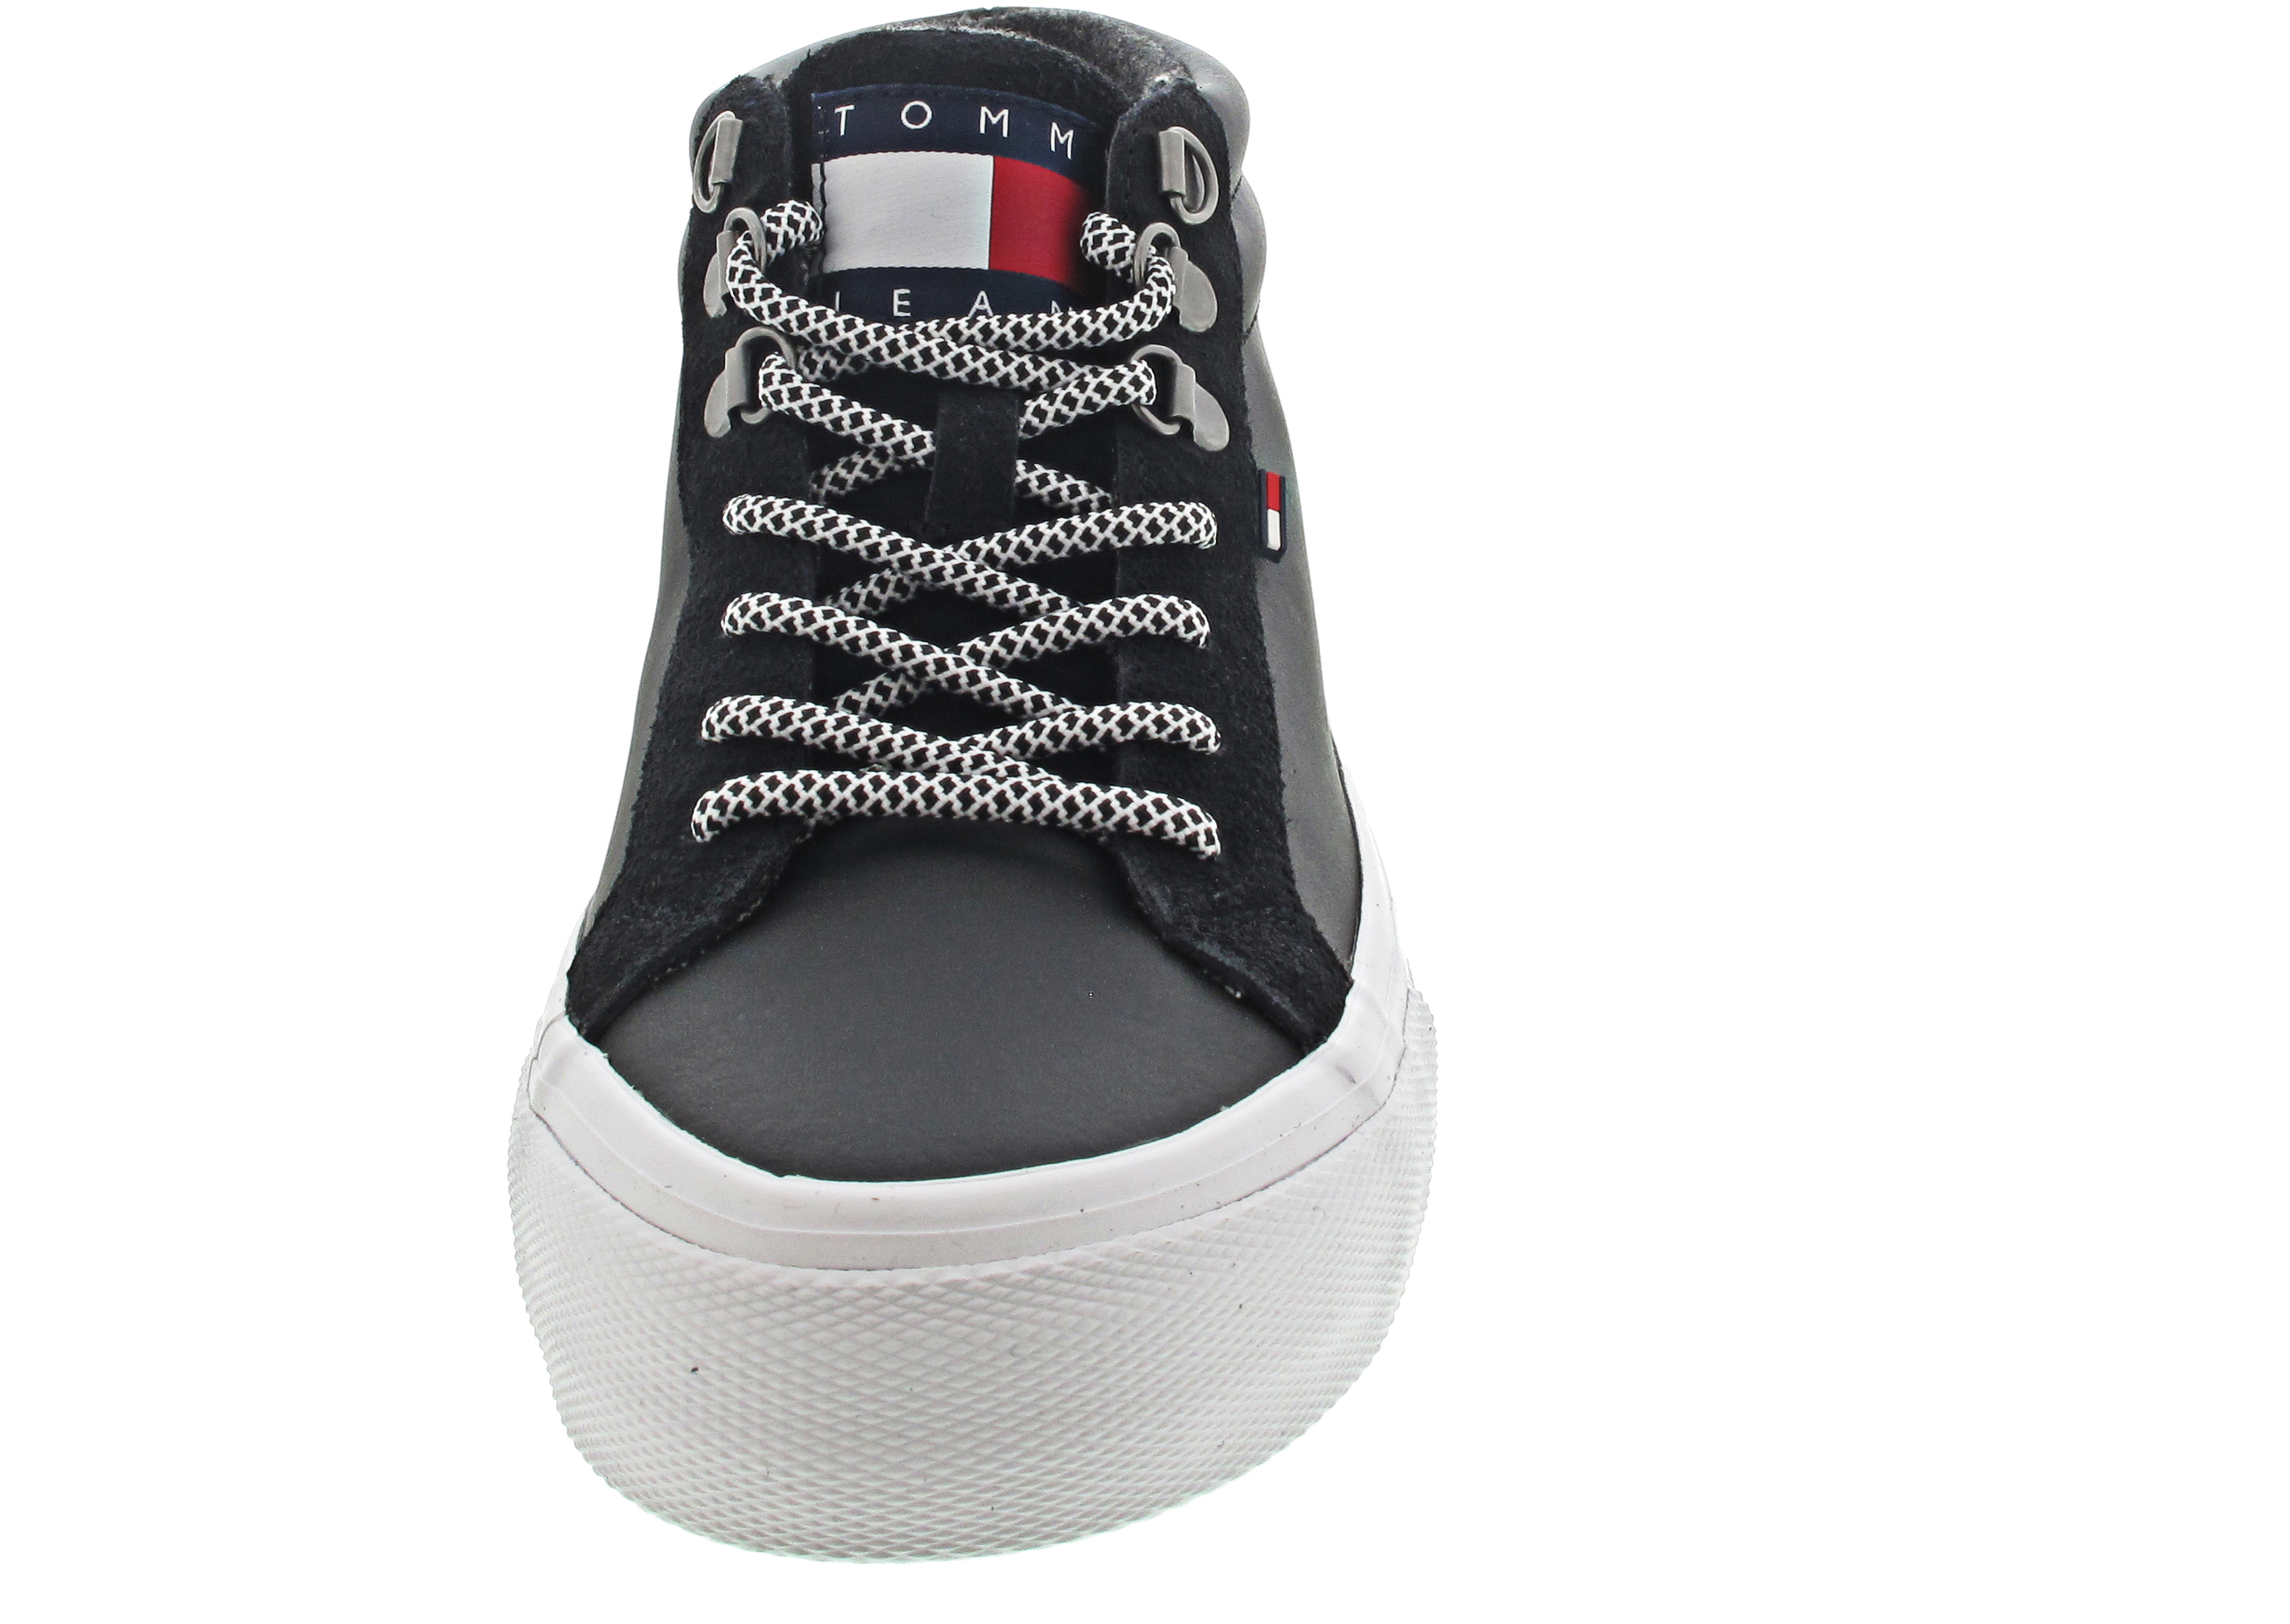 Tommy Hilfiger Classic Midcut Sneaker